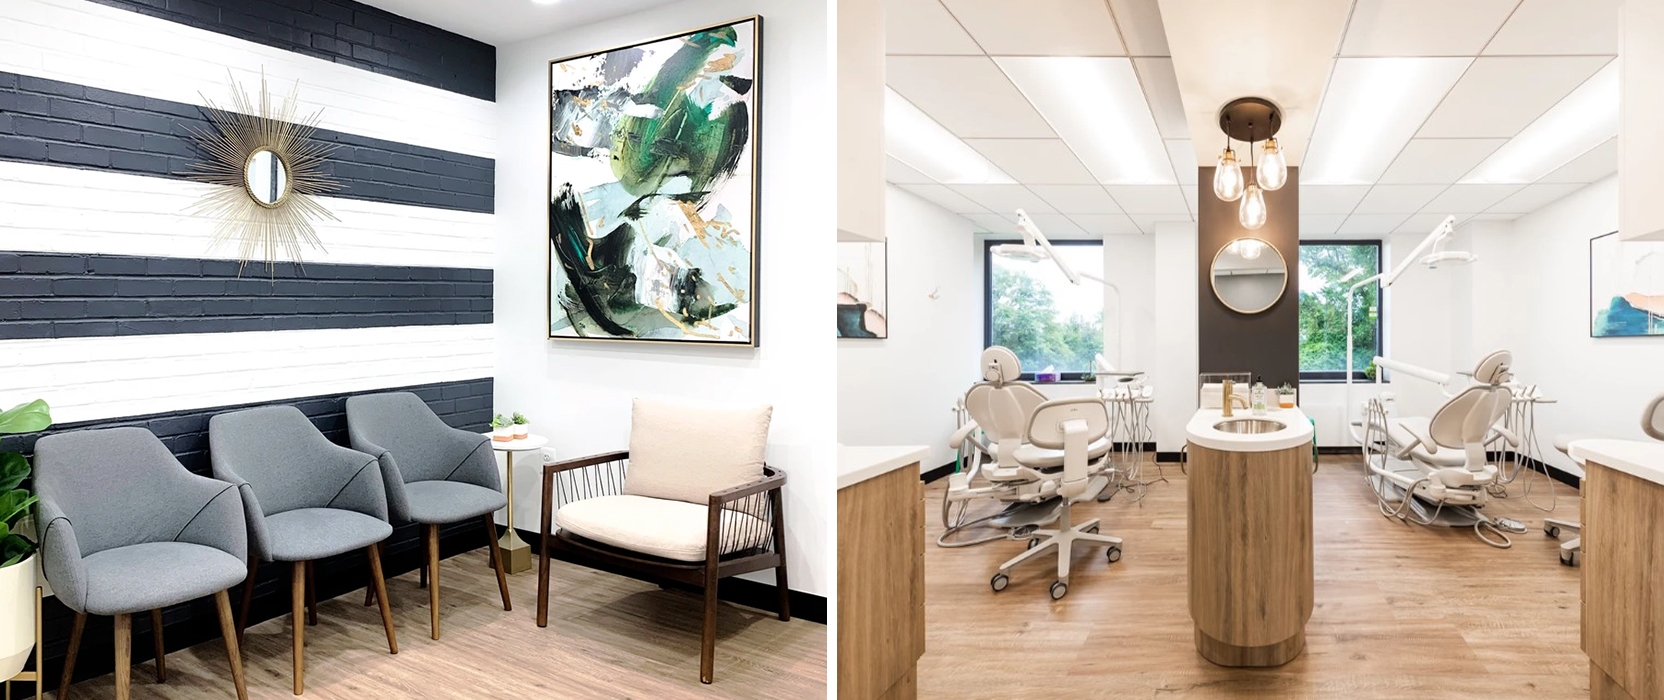 Left image: Waiting area with modern chairs and horizontal stripe painted brick accent wall. Right image: Two exam chairs in a modern dental office with neutral color scheme.